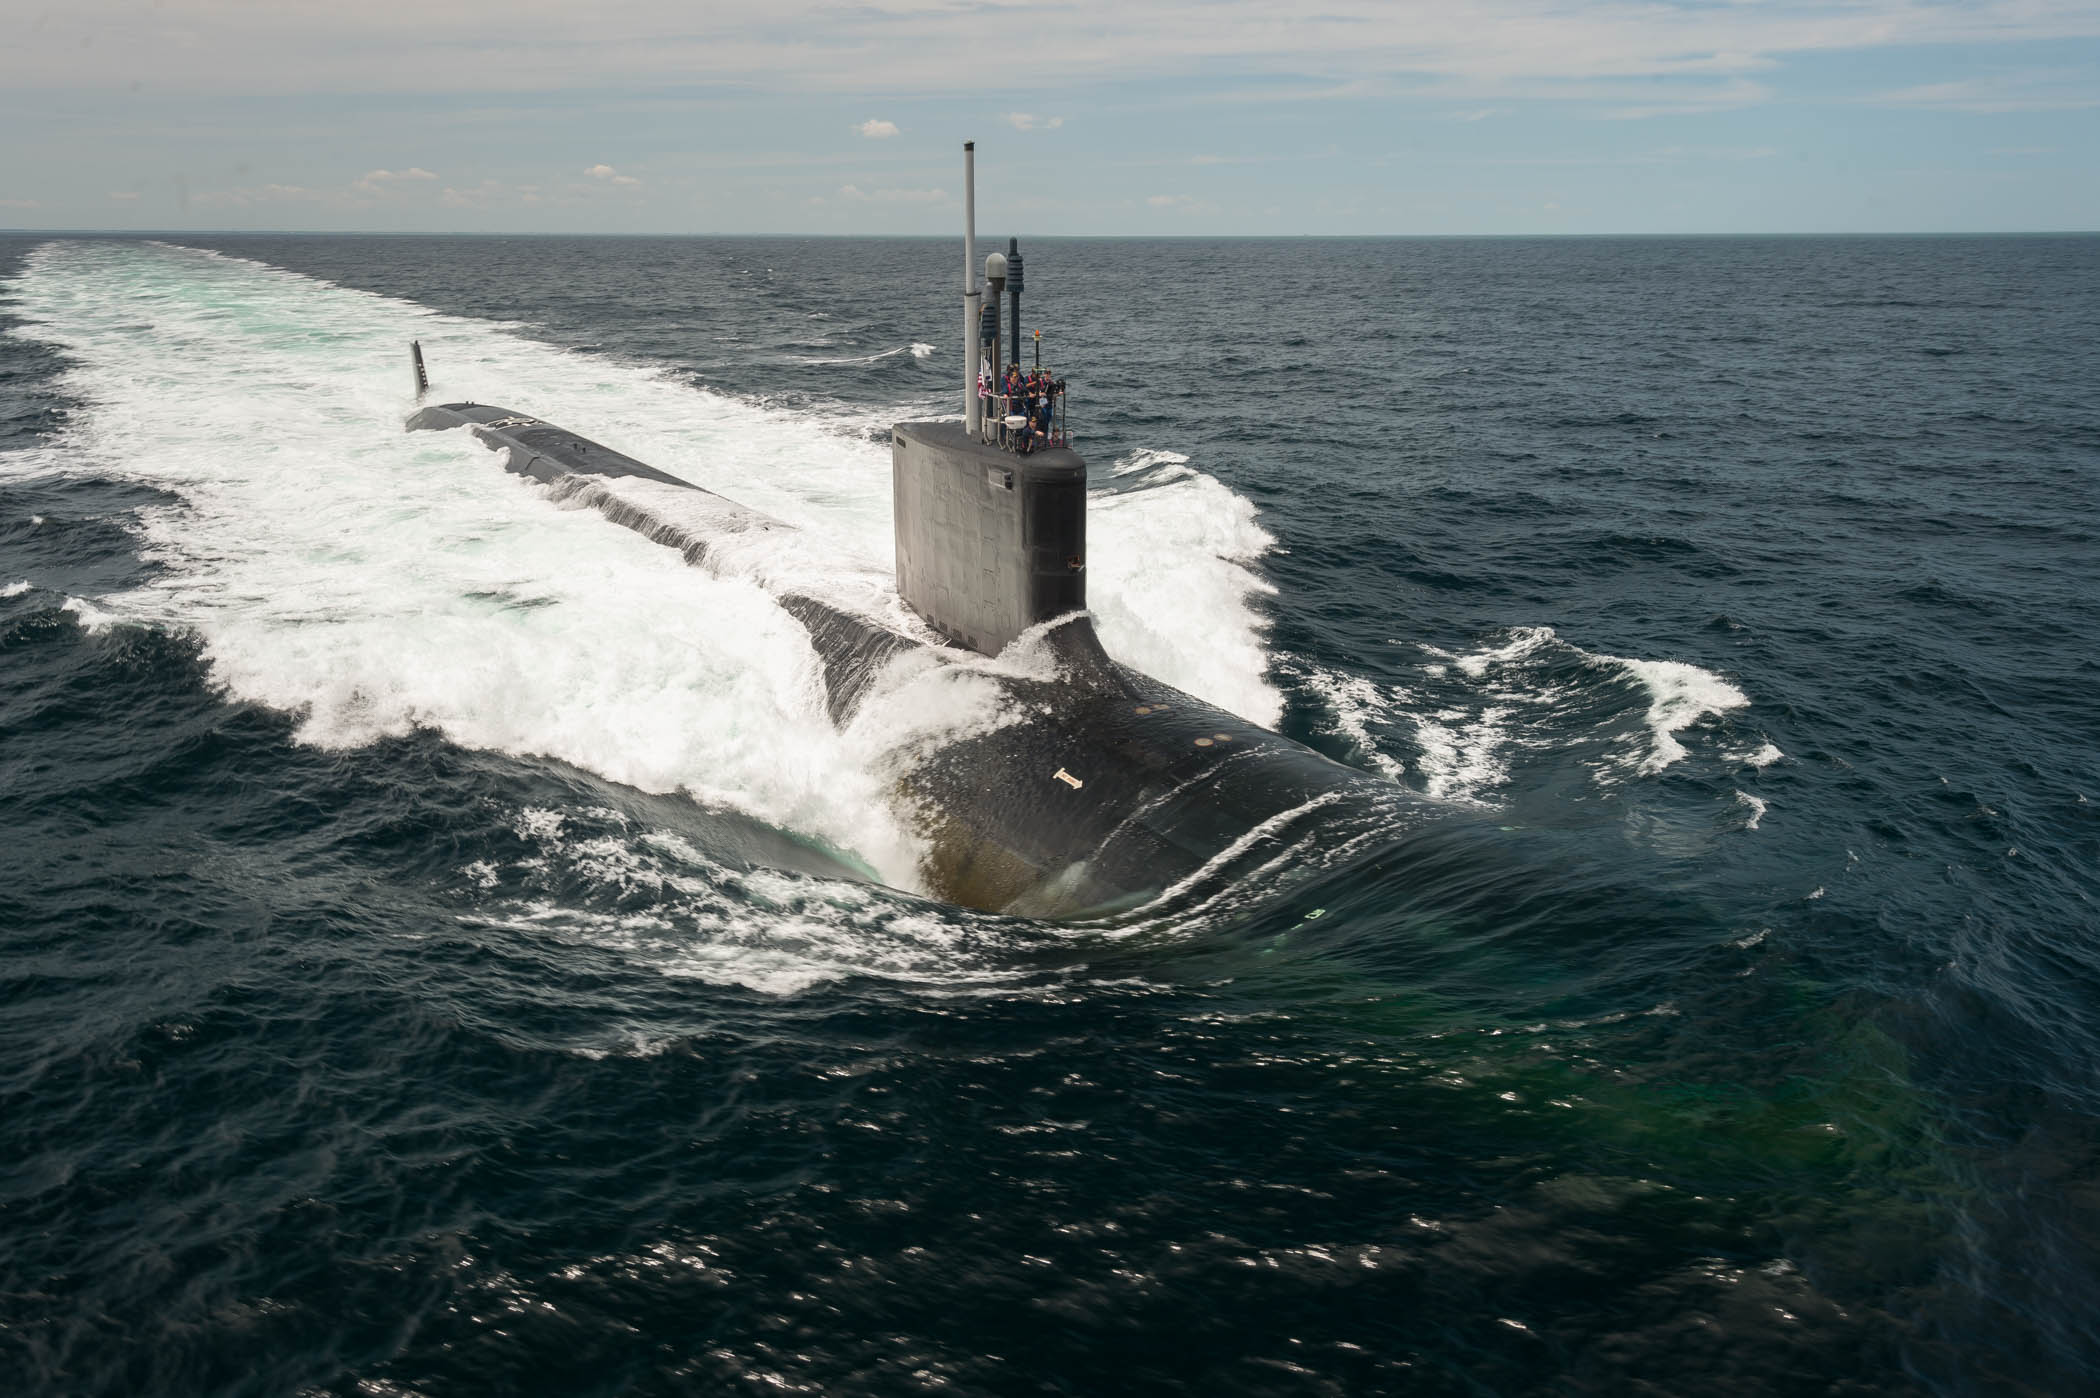 Pre-Commissioning Unit (PCU) John Warner (SSN-785) conducts sea trials in the Atlantic Ocean on June 9, 2015. US Navy Photo